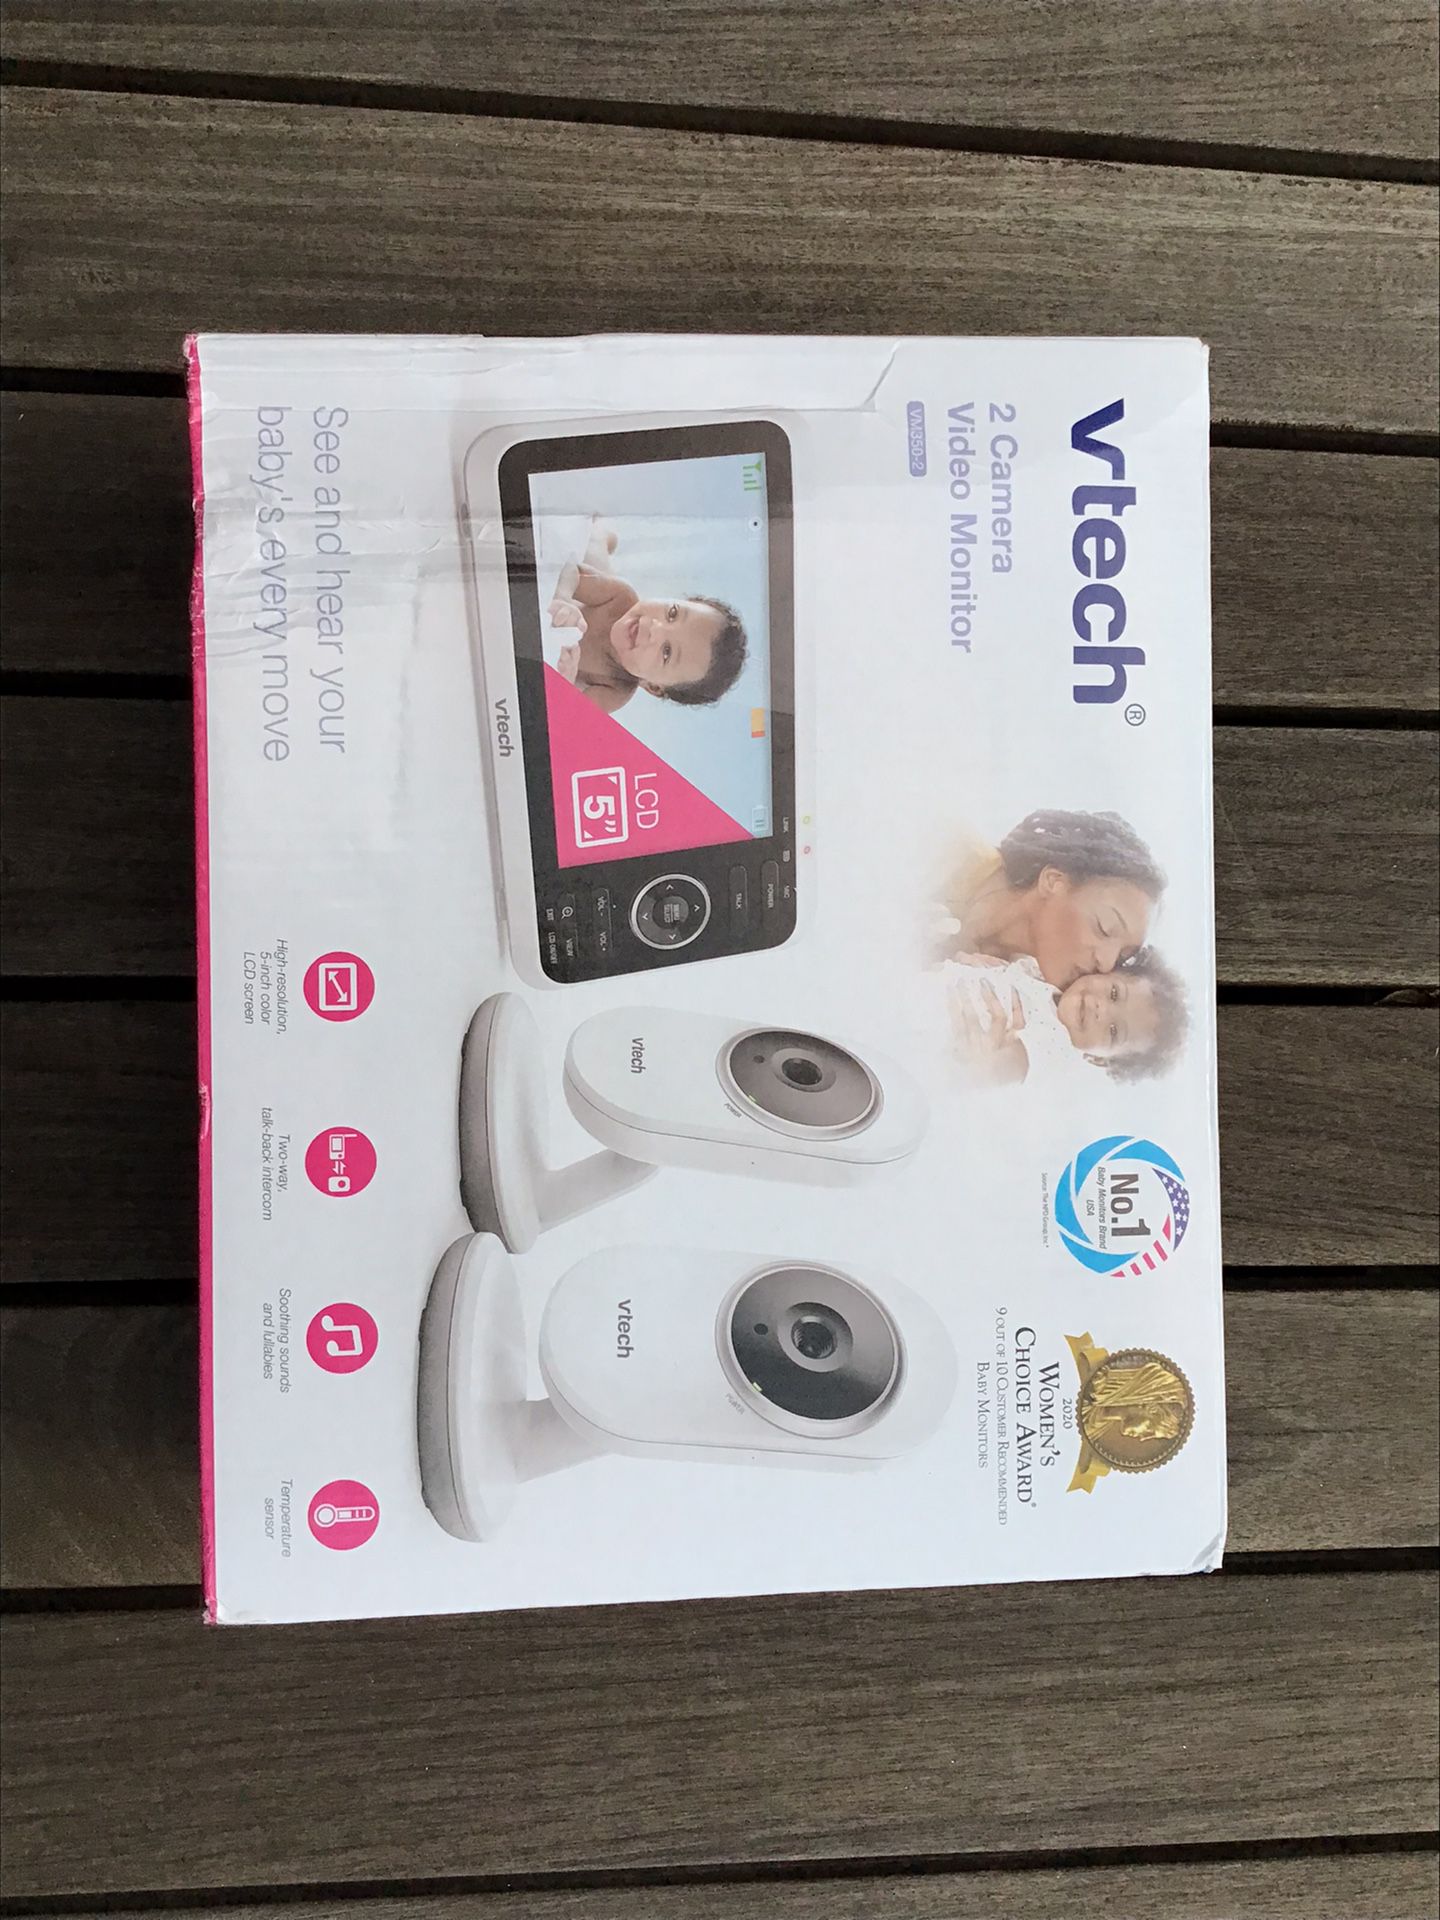 VTech VM350-2 5" Video Baby Monitor with 5" Screen, Long Range, Invision Infrared Night Vision, 2 Cameras, Multiple Viewing Options, Two Way Talk, Aut